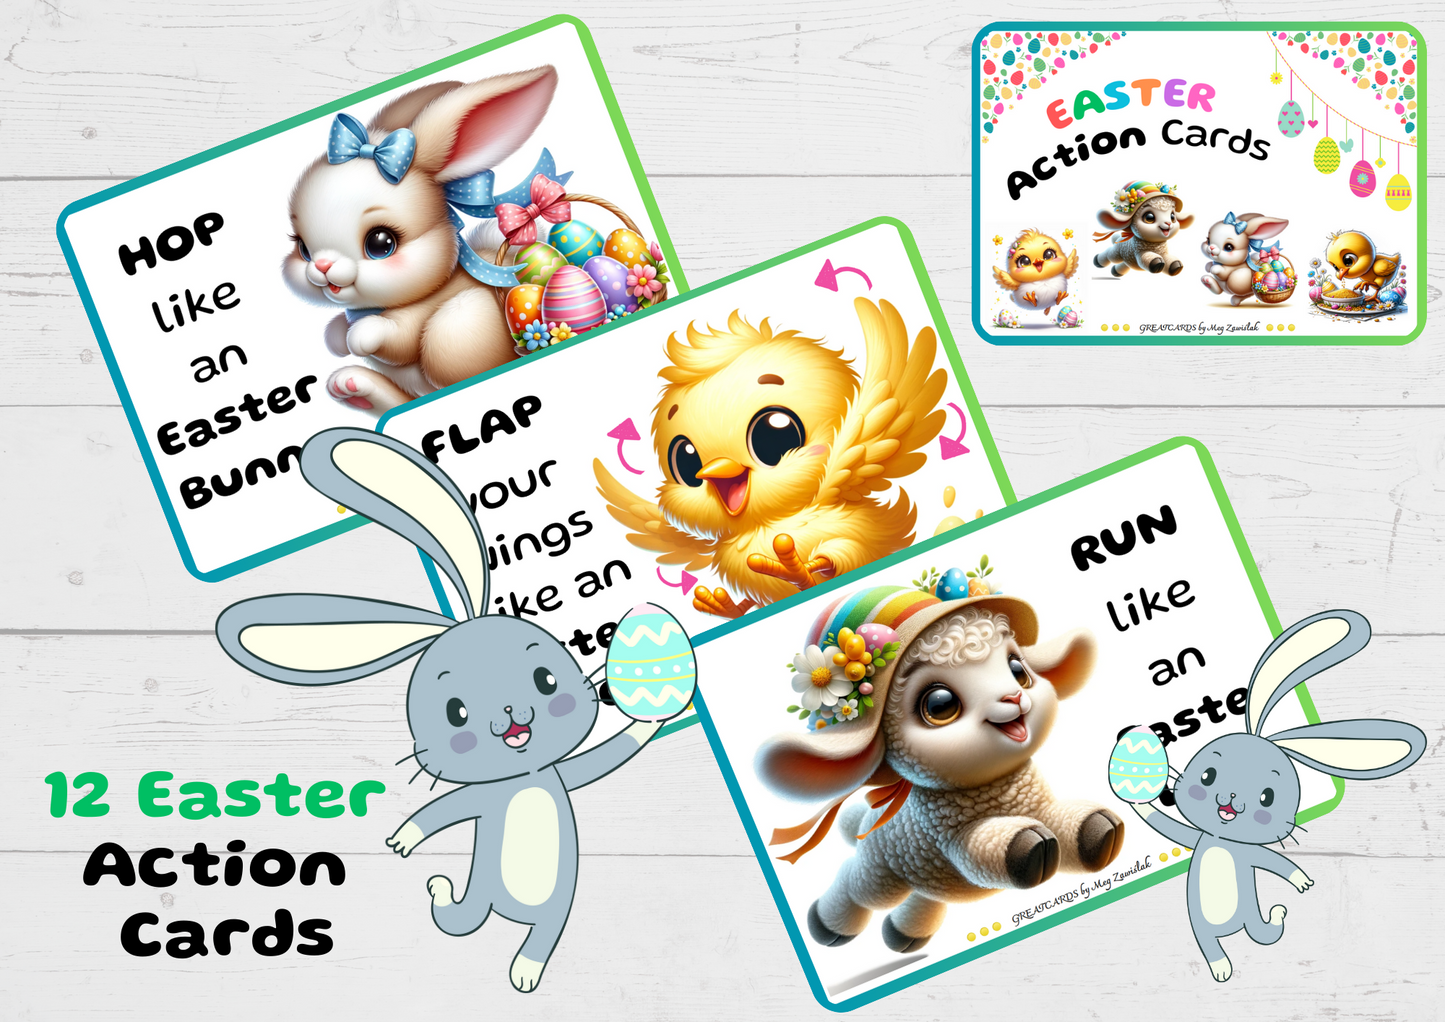 Greatcards - Easter Action Cards